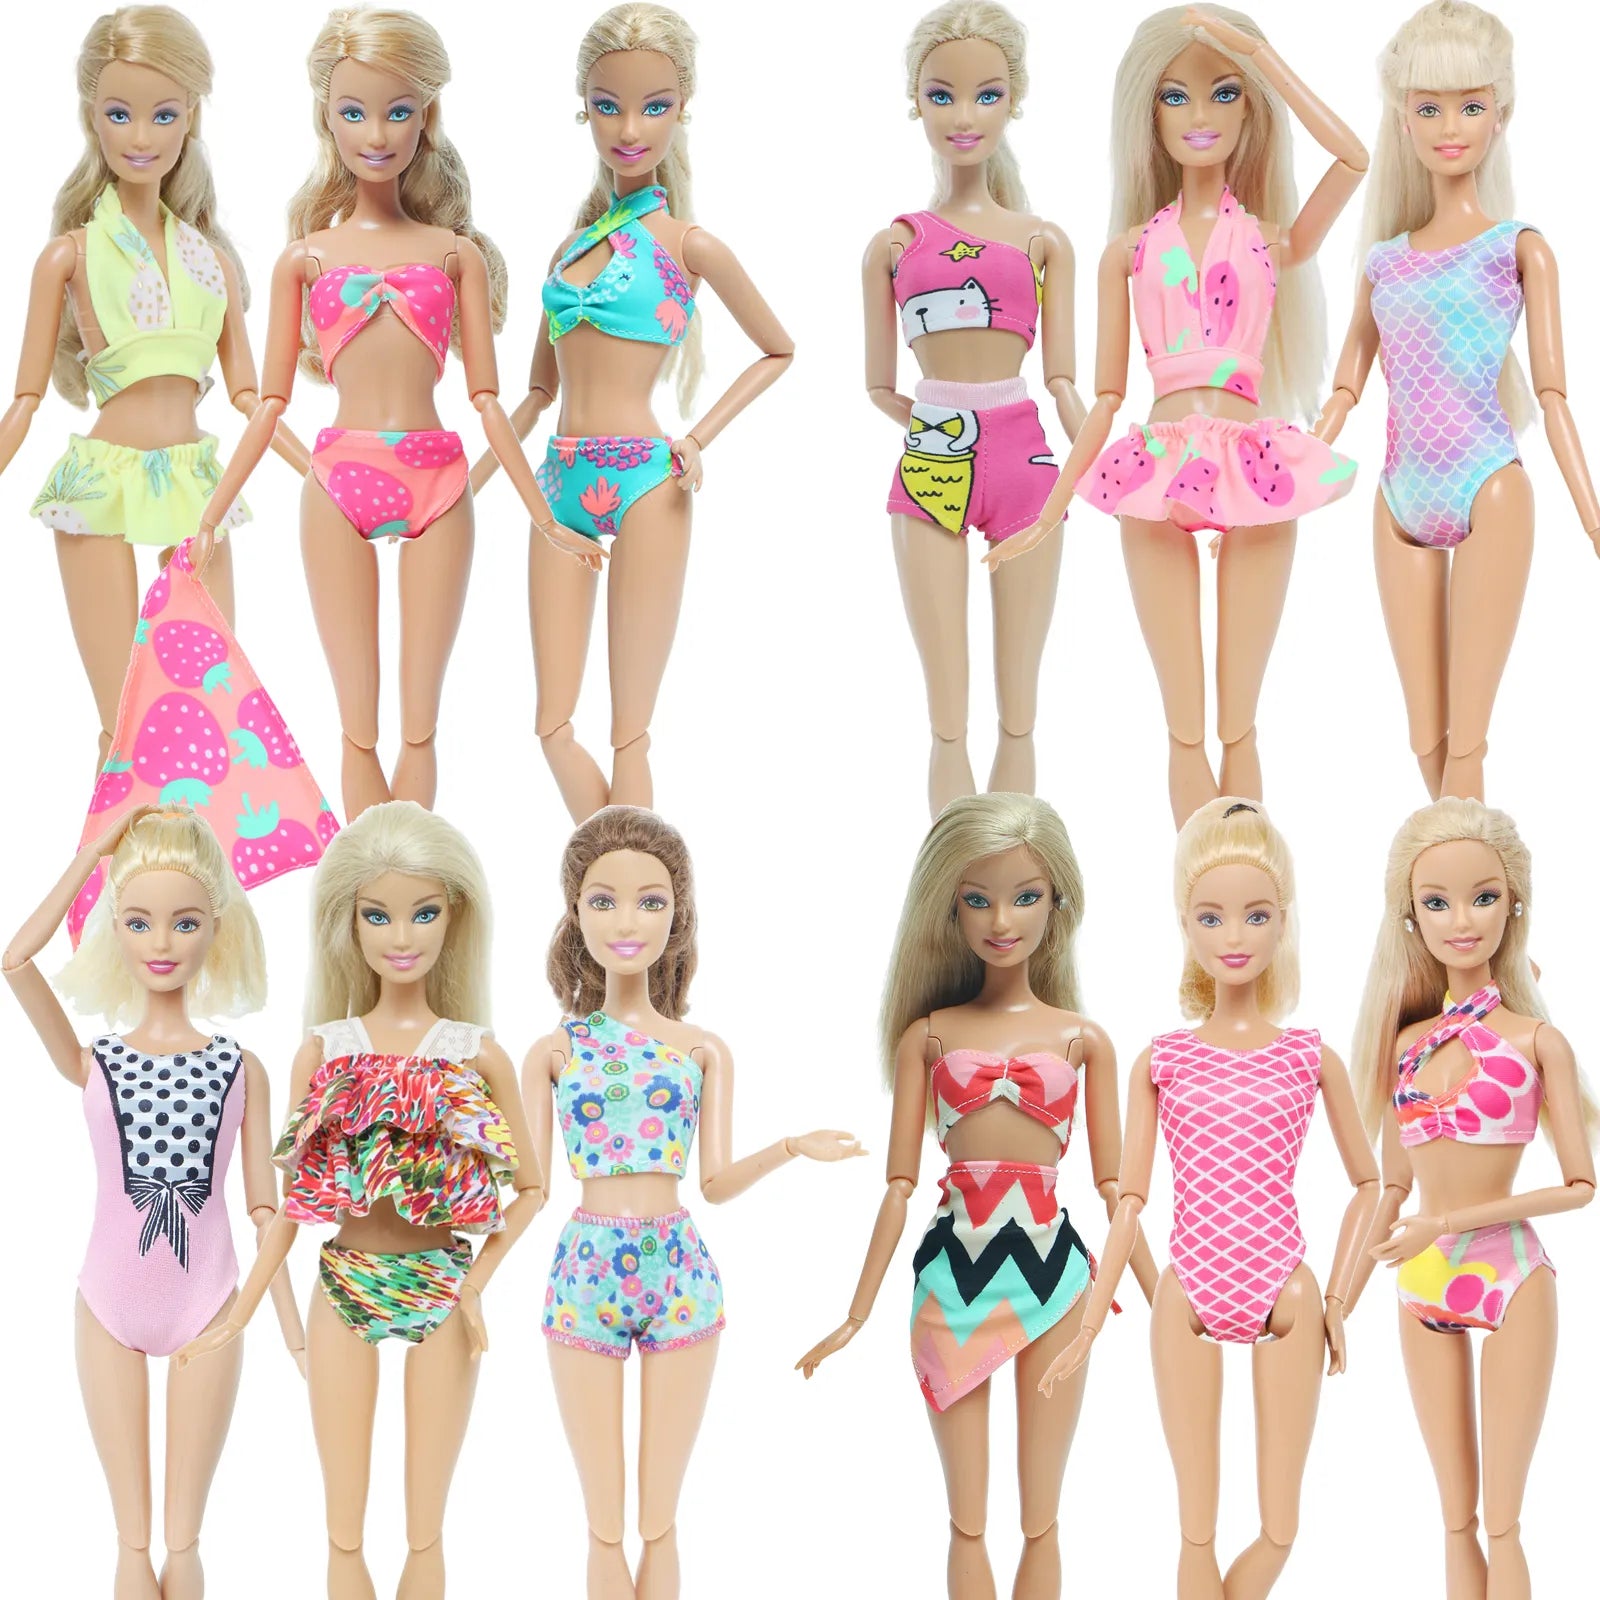 3 Set Handmade Doll Swimsuit Bikini Dress Bra Tops Pants Outfit Swimming Suit Beach Bathing Clothes for Barbie Doll Accessories